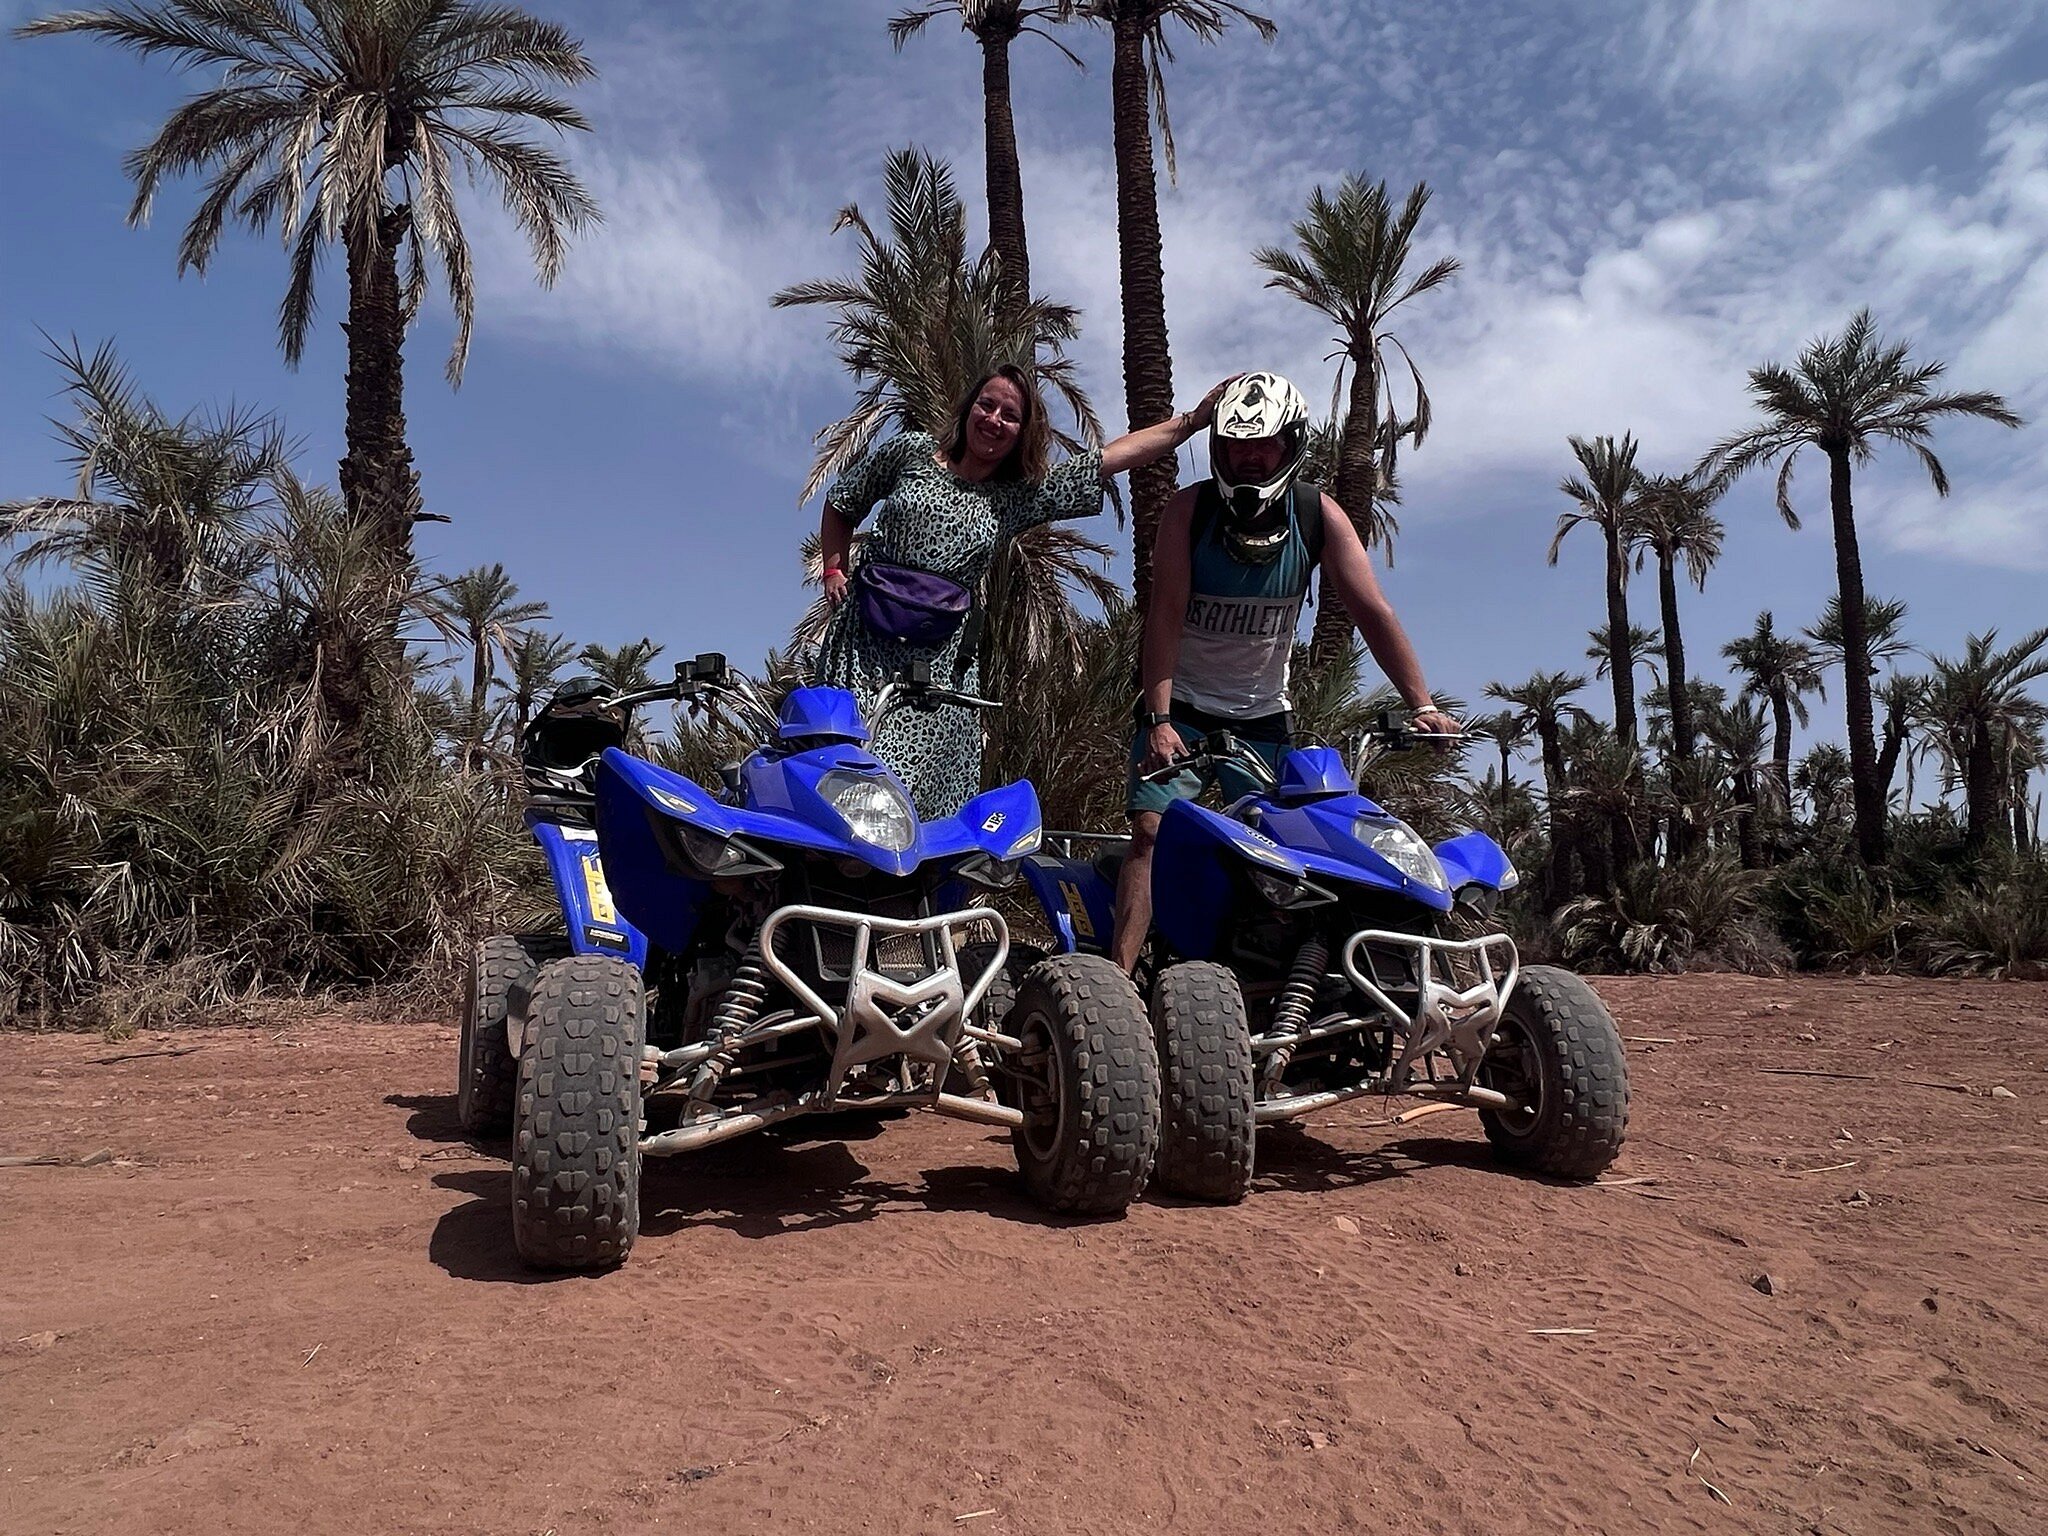 Marrakech expériences Quad - All You Need to Know BEFORE You Go